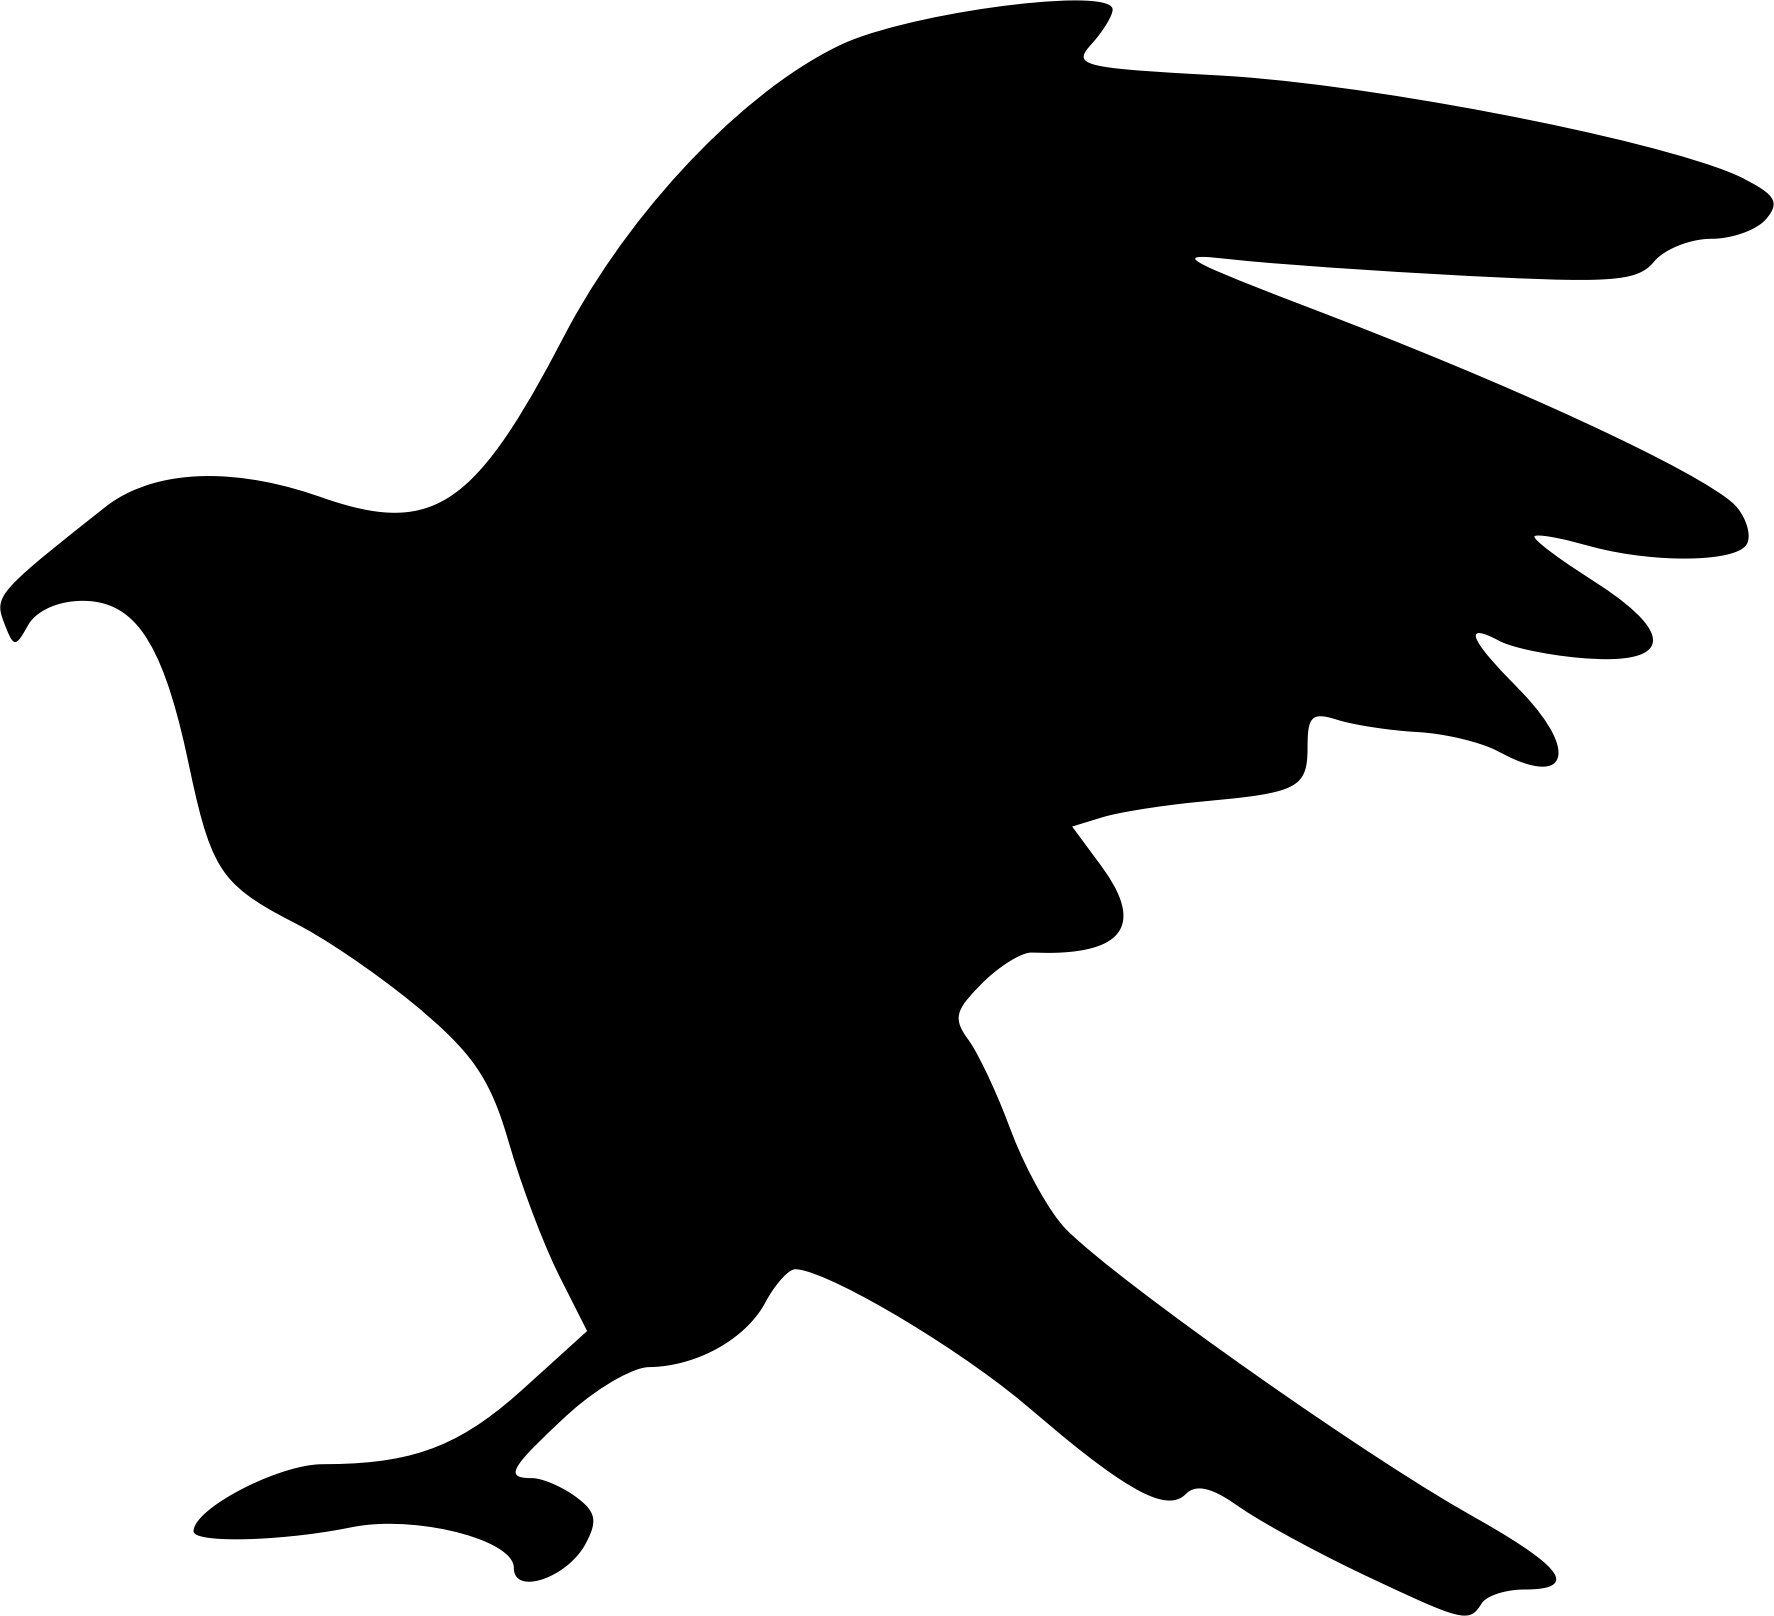 Silhouette Hawk at GetDrawings.com | Free for personal use Silhouette